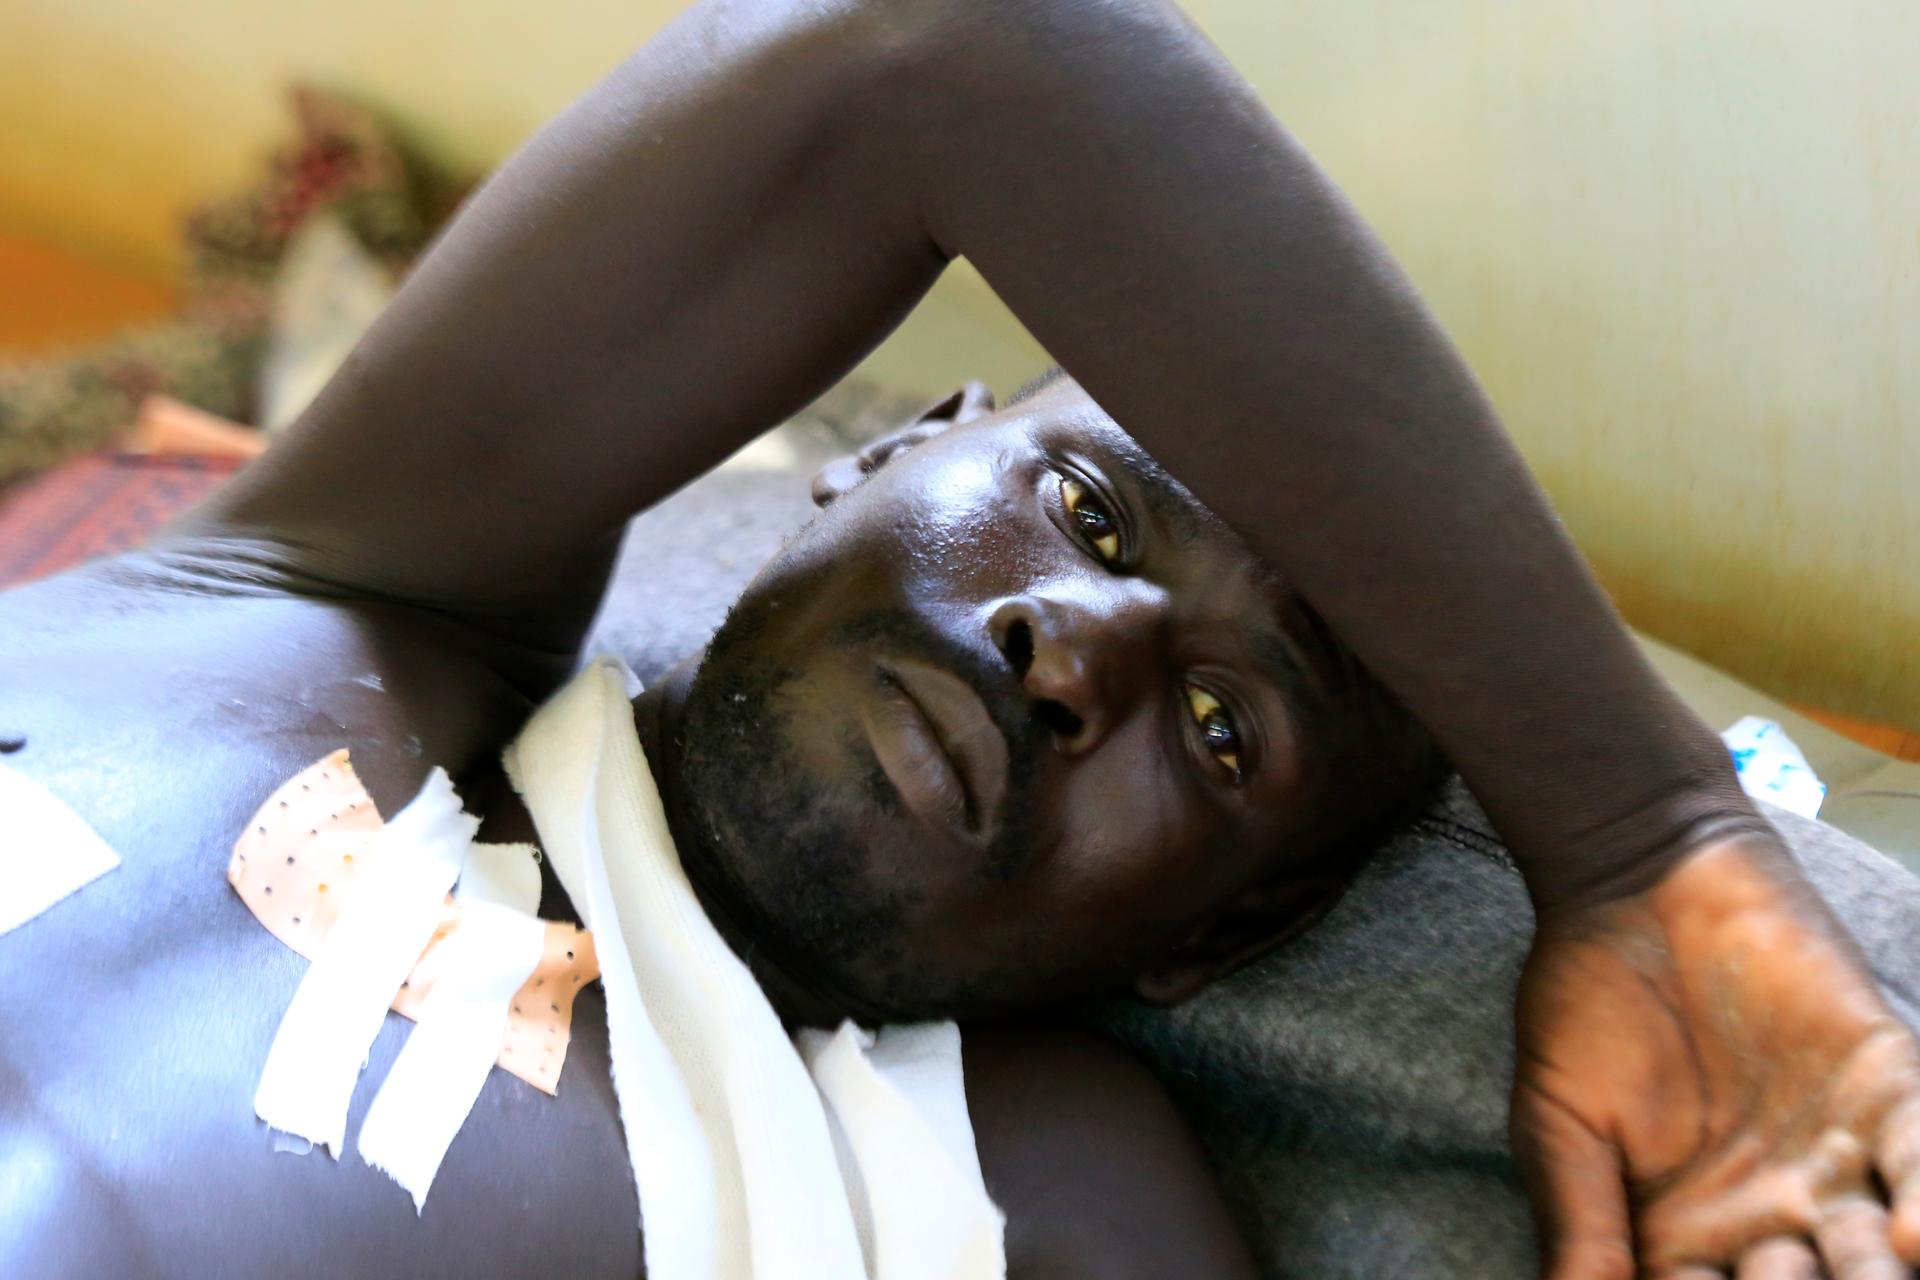 A displaced man at the UN 's Tomping camp, where some 15,000 displaced South Sudanese are sheltered.